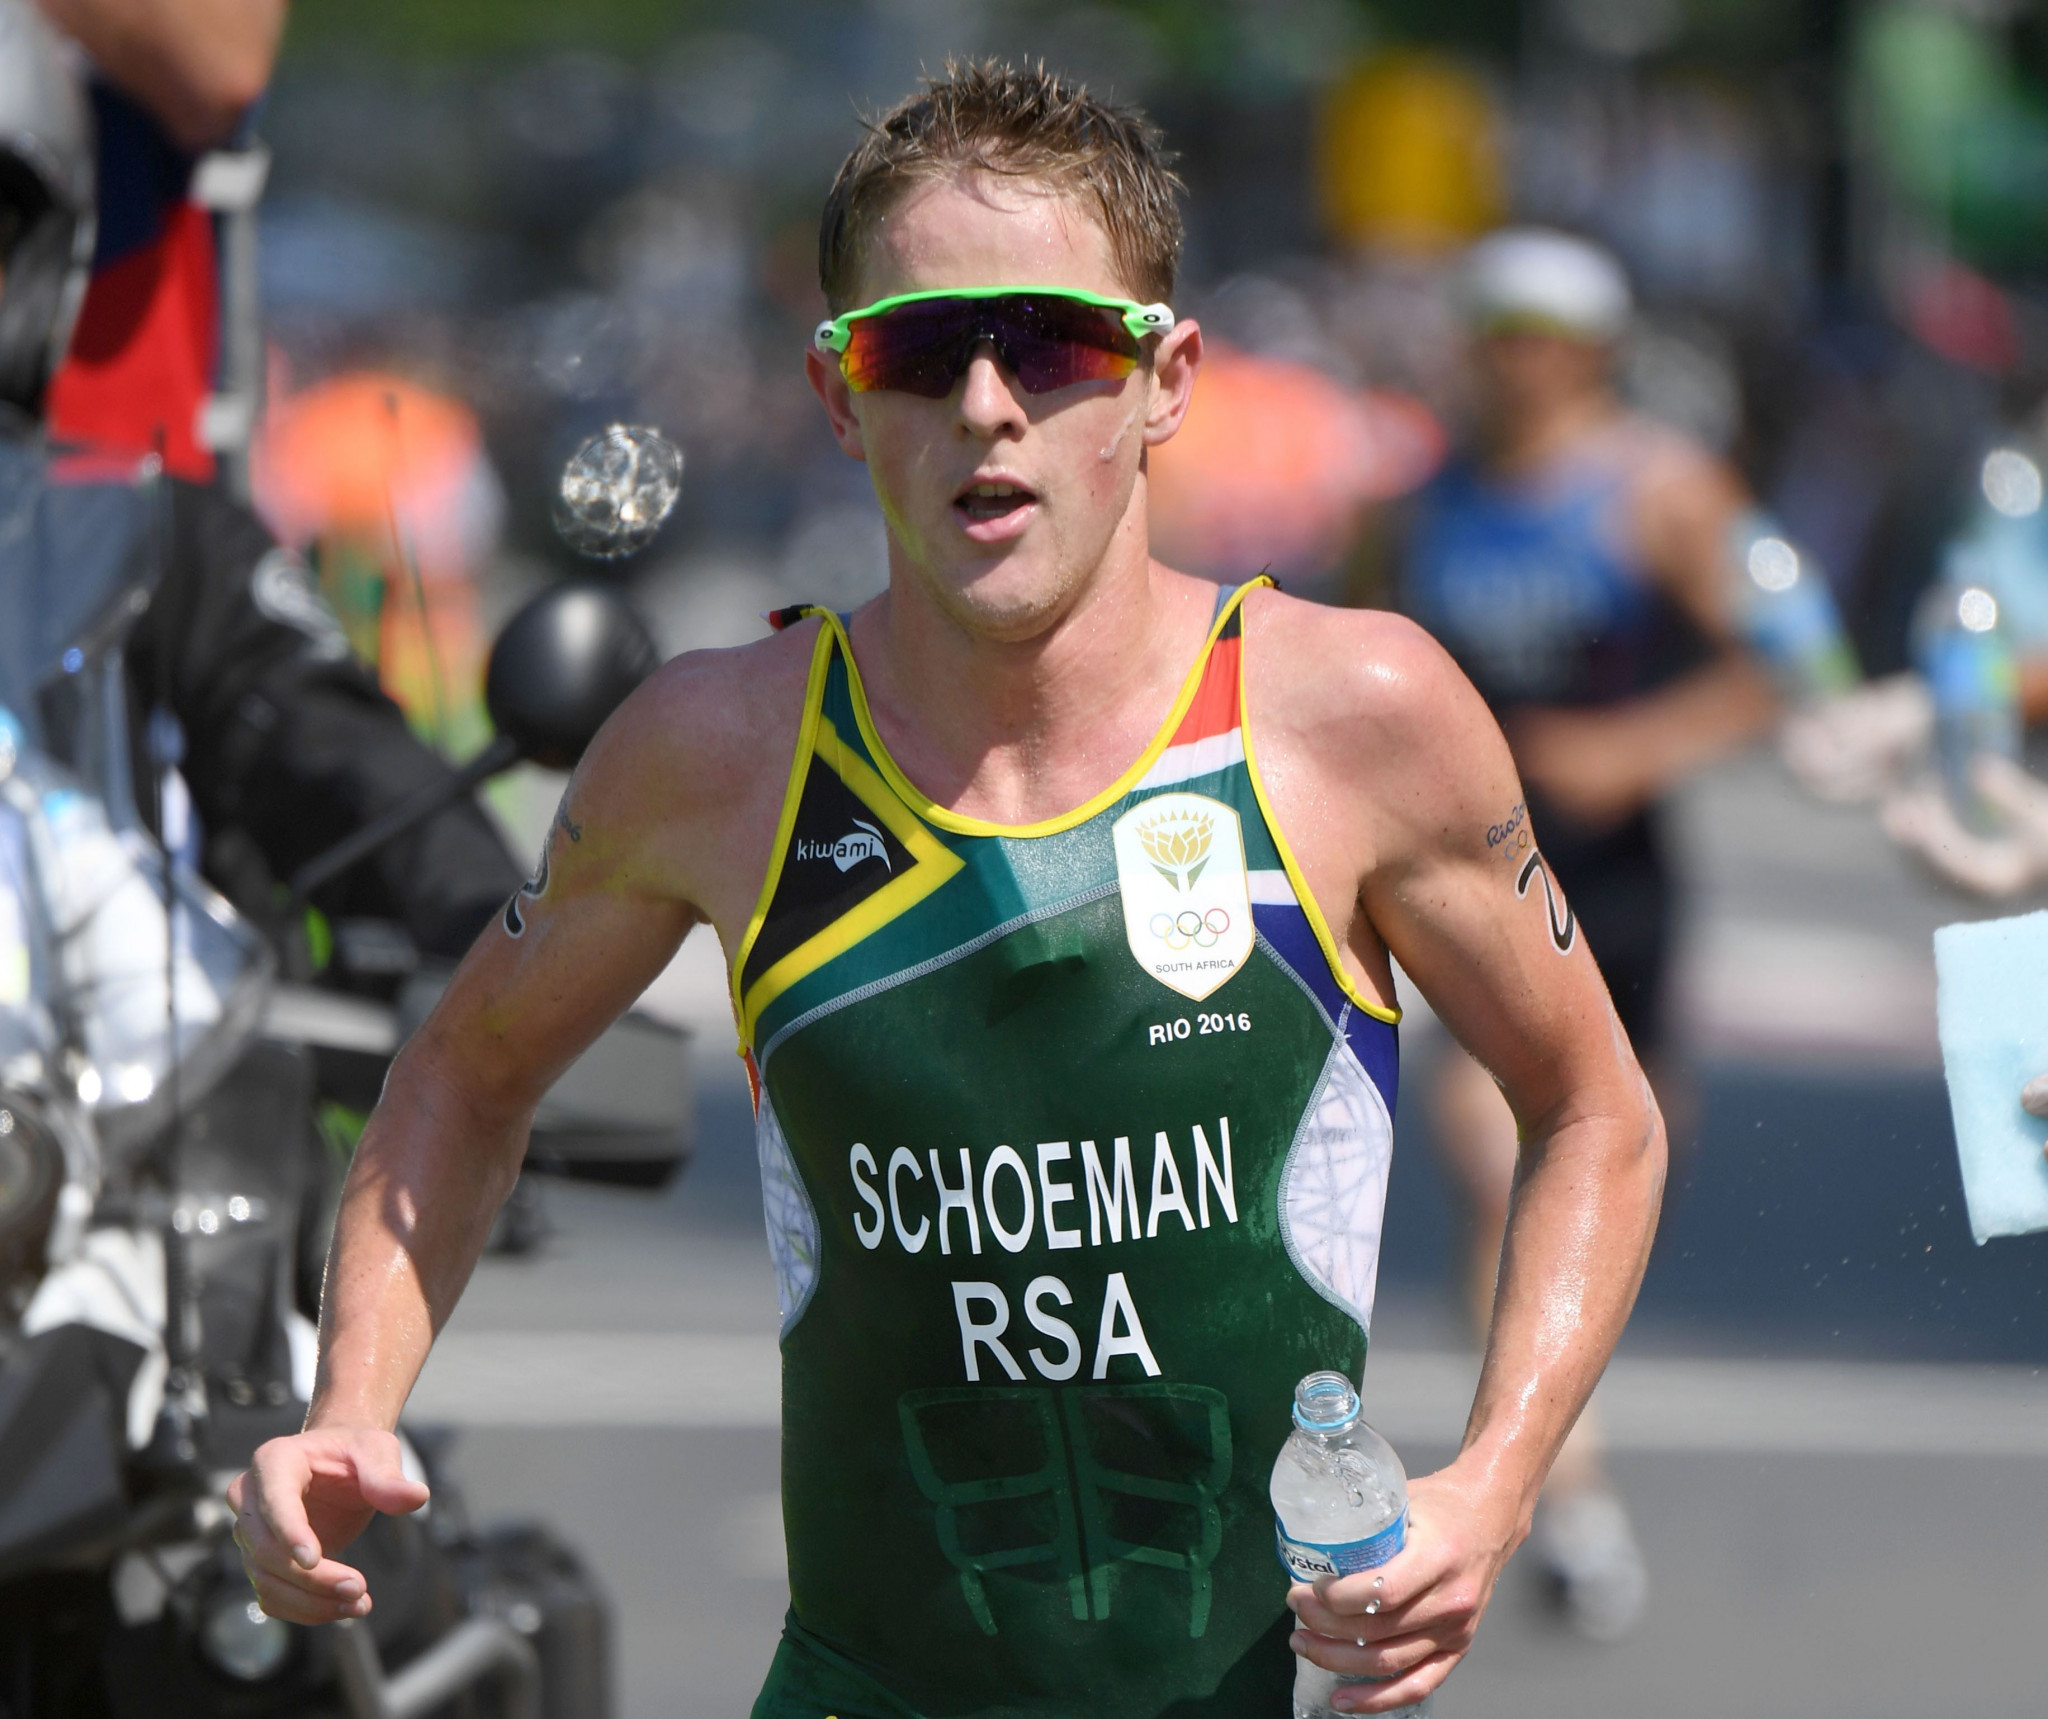 South Africa's Henri Schoeman will be hoping to get the 2018 season off to a positive start after doubts were cast over his Olympic bronze medal at Rio 2016 following doping accusations ©Getty Images